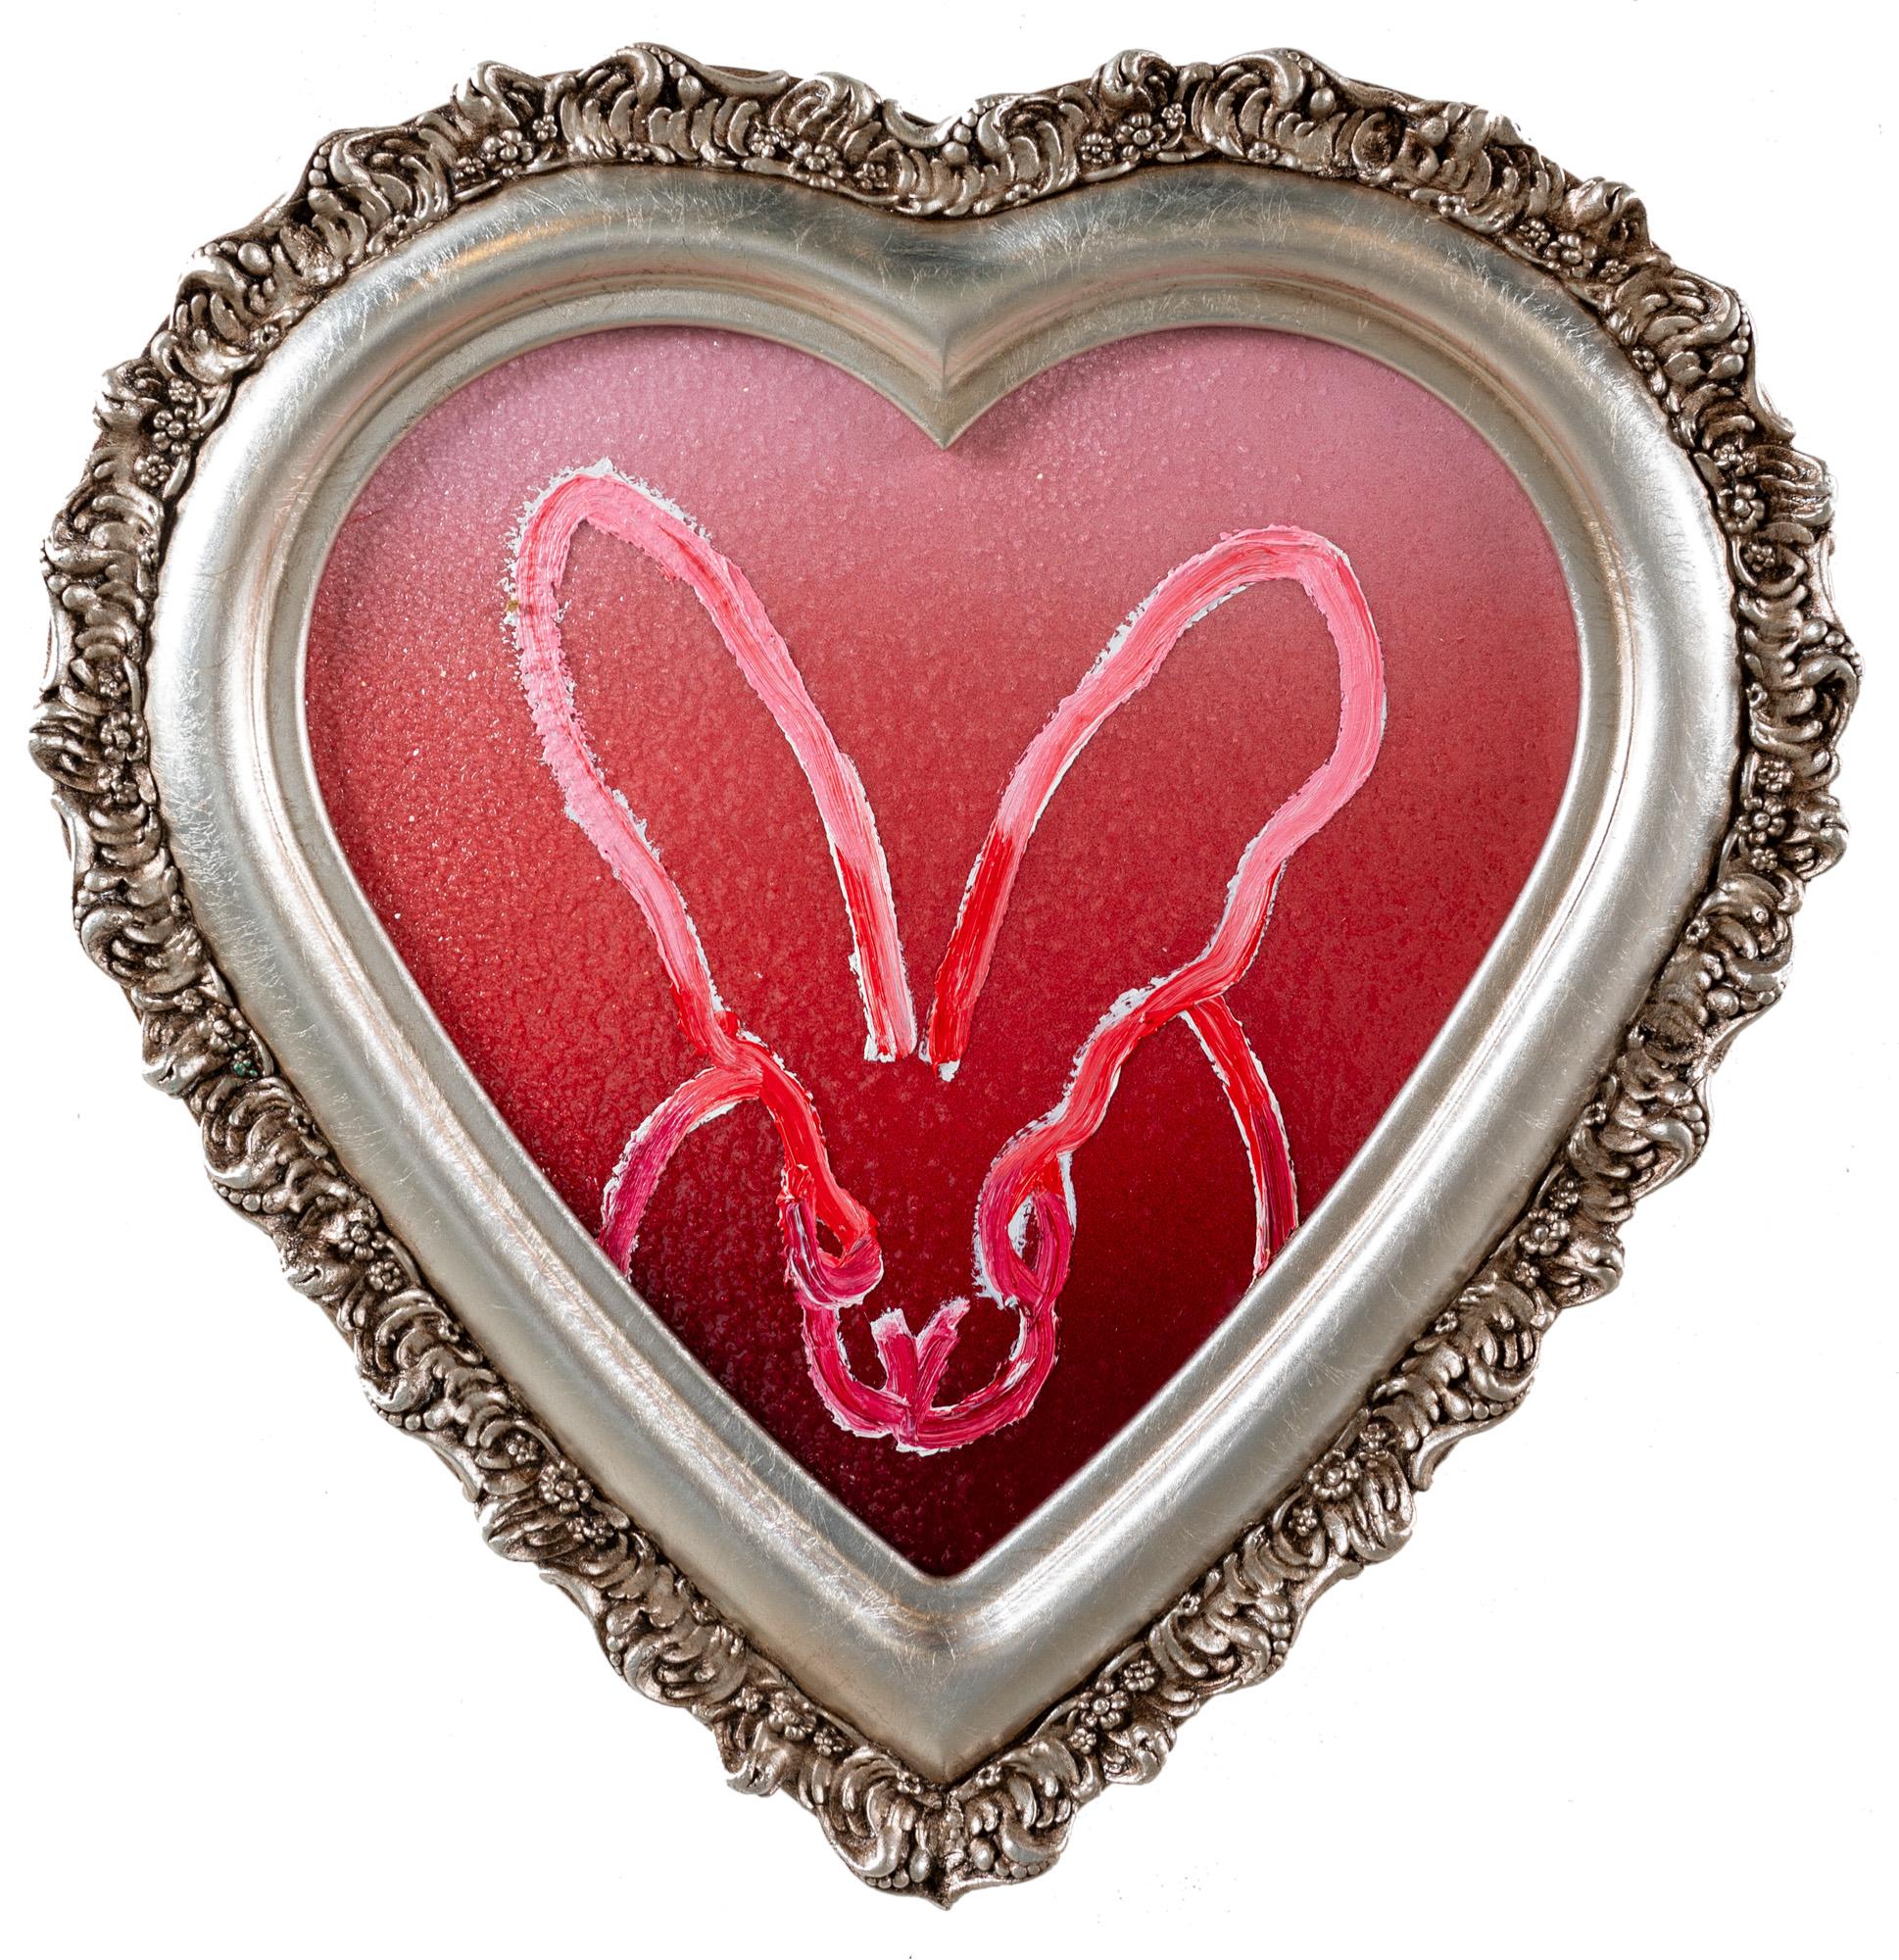 Hunt Slonem "Savannah" Neo-Expressionist Bunny Heart-Shaped Painting on Wood